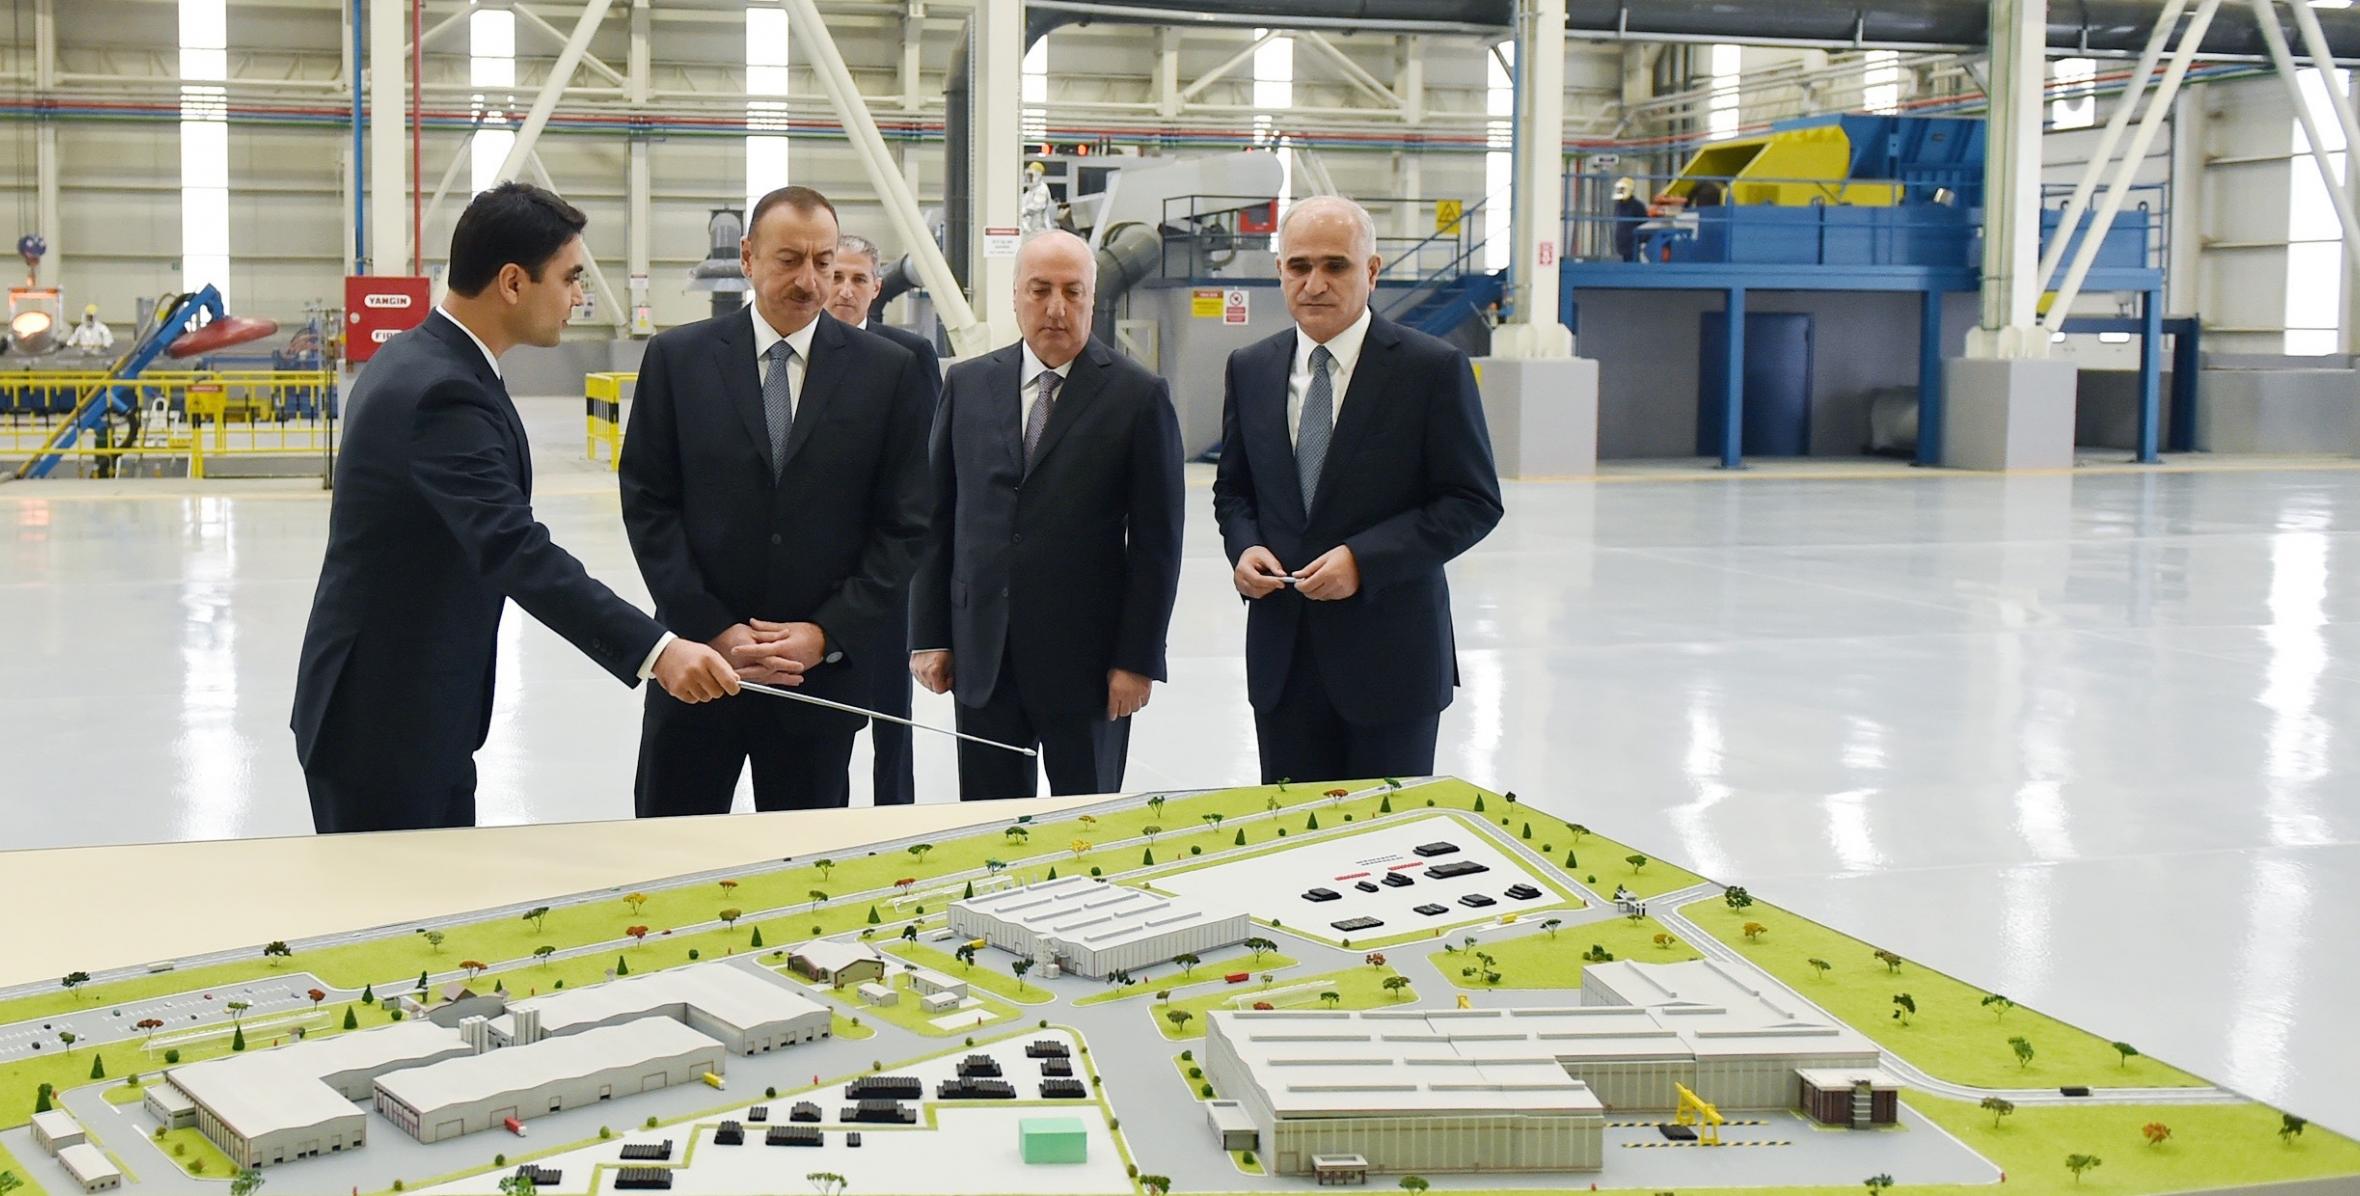 Ilham Aliyev attended the opening of the Technical Equipment Plant in Sumgayit